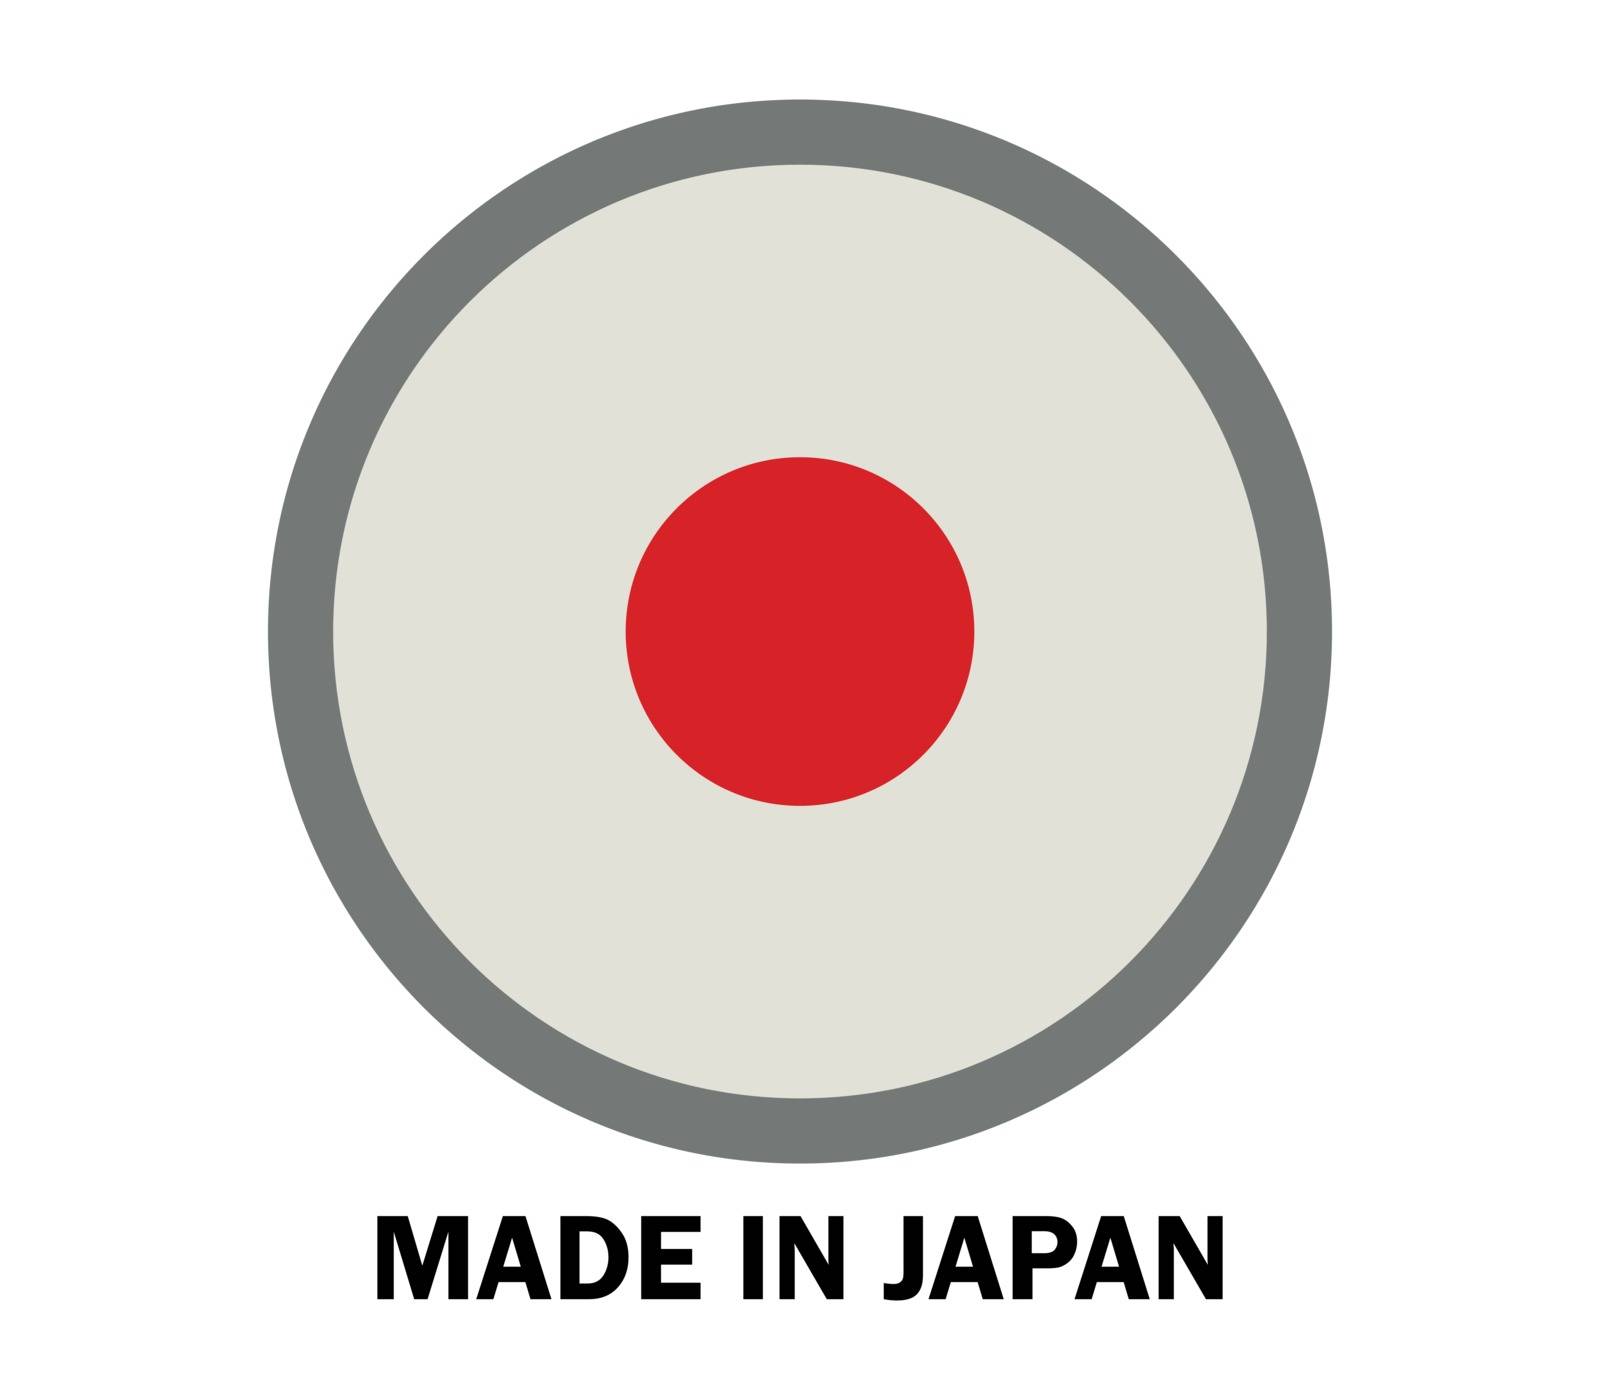 made in Japan by Mark1987